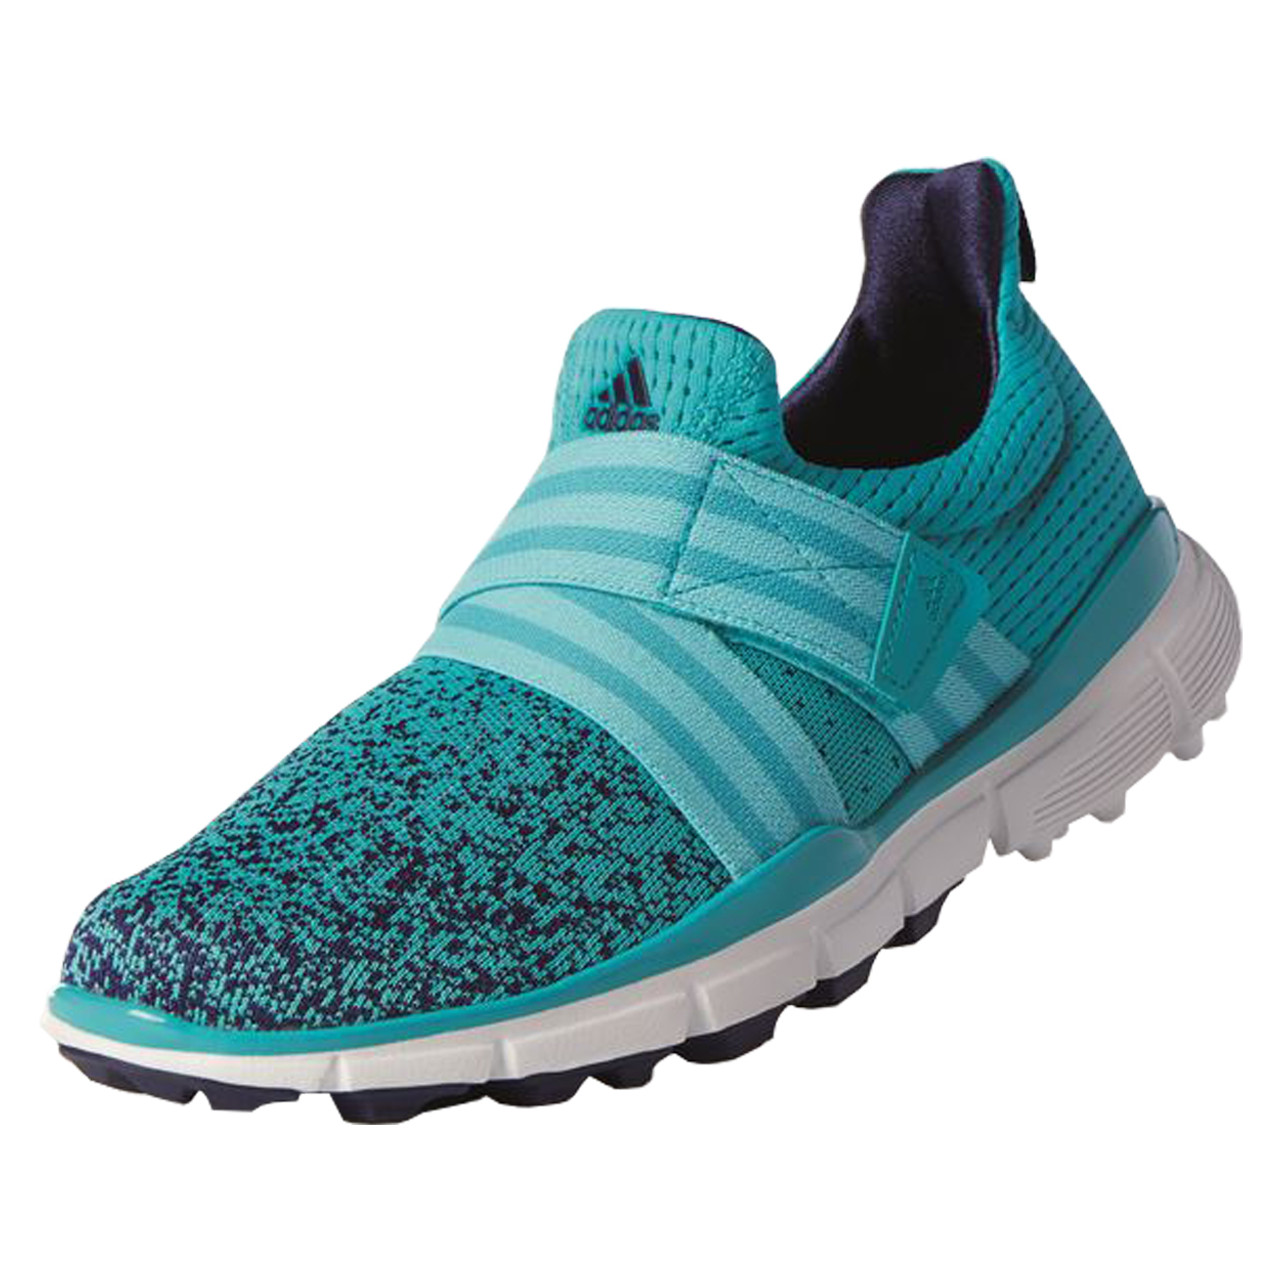 adidas ladies climacool knit golf shoes